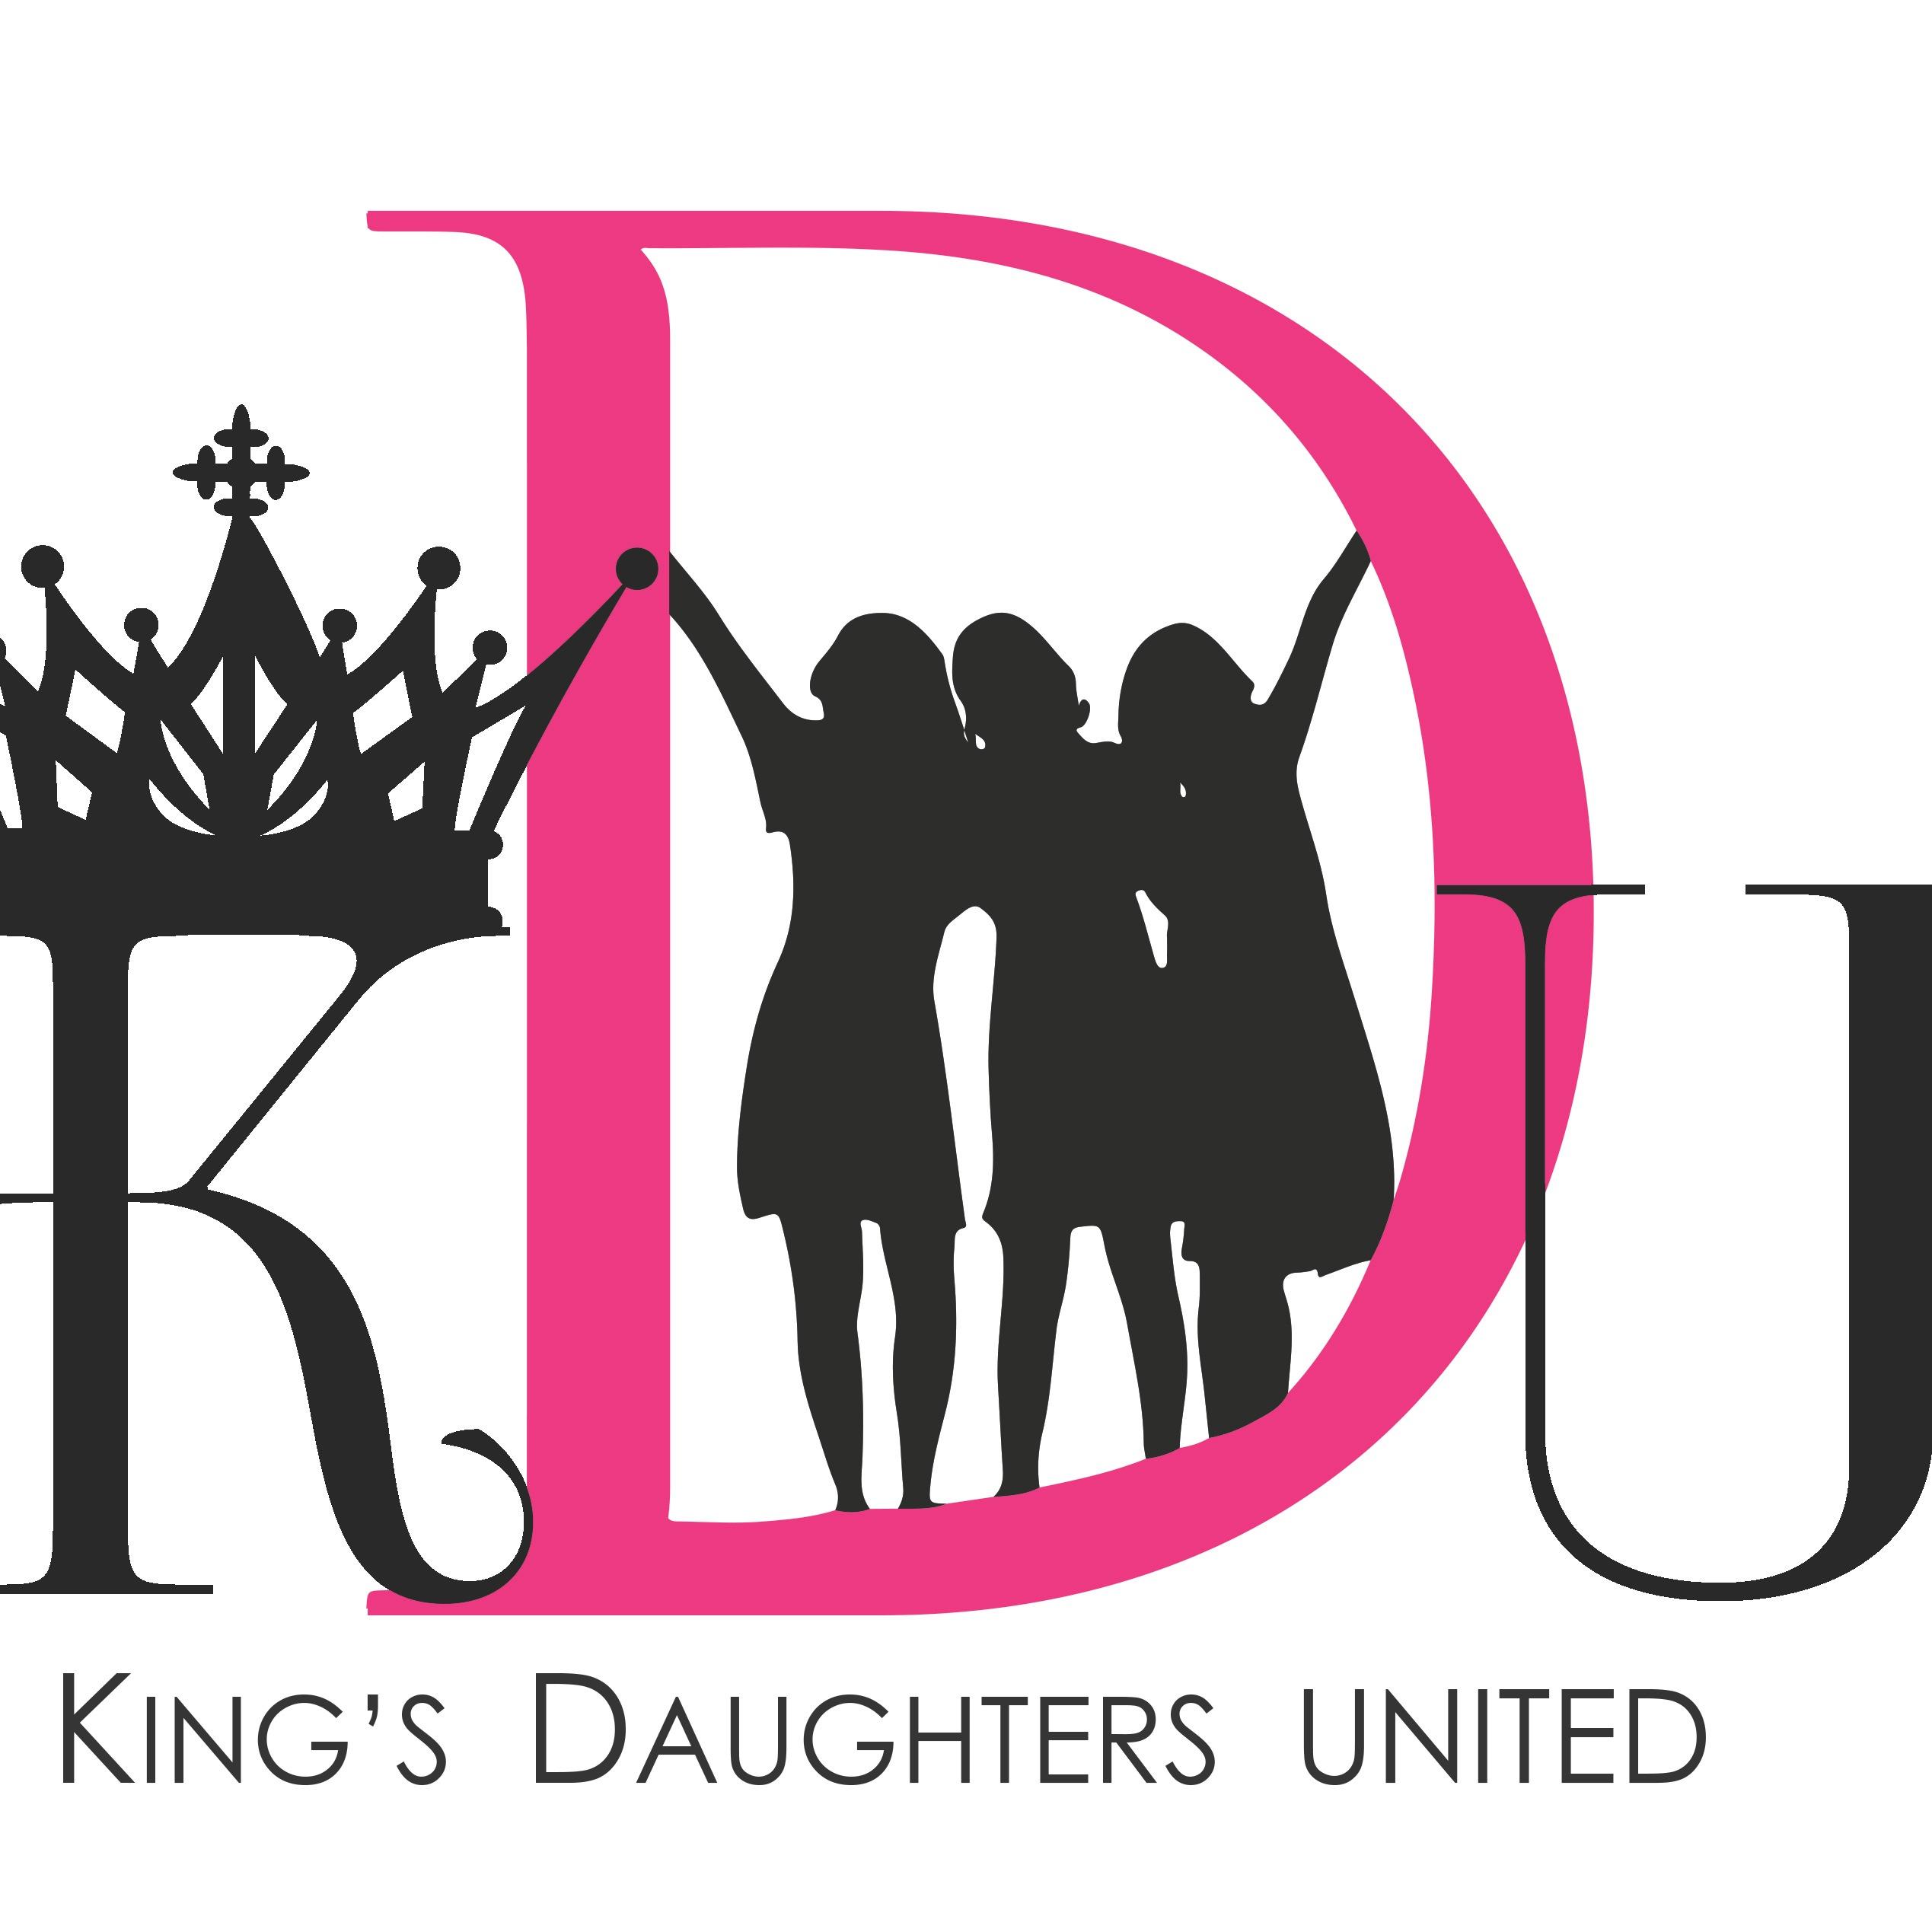 Nonprofit focused on mentoring and empowering young women age 12 - 19.